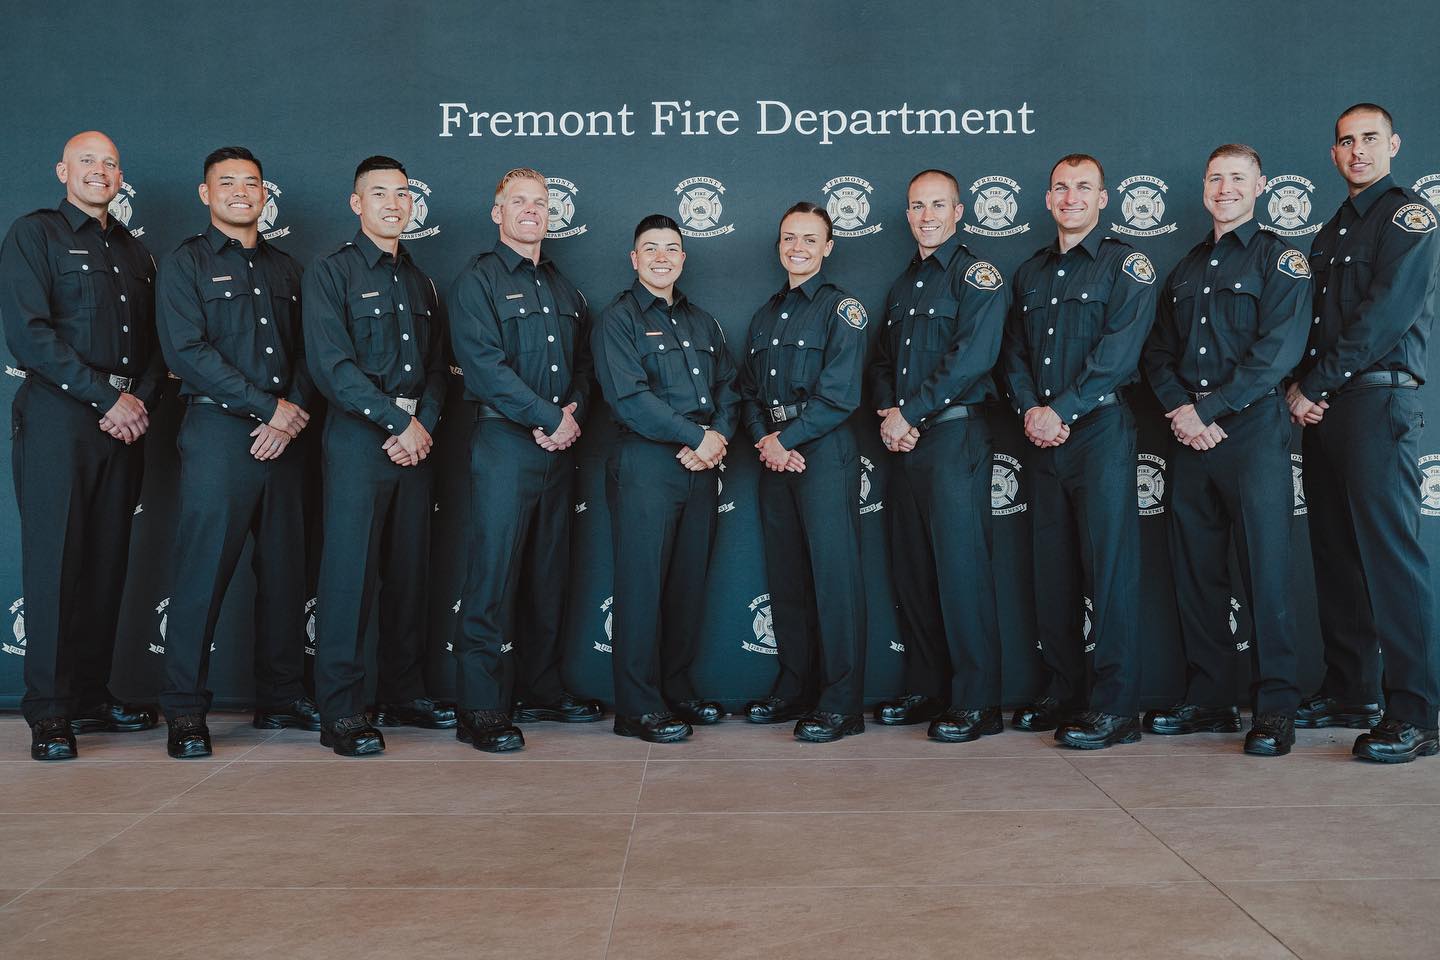 Fremont fire fighters lined up